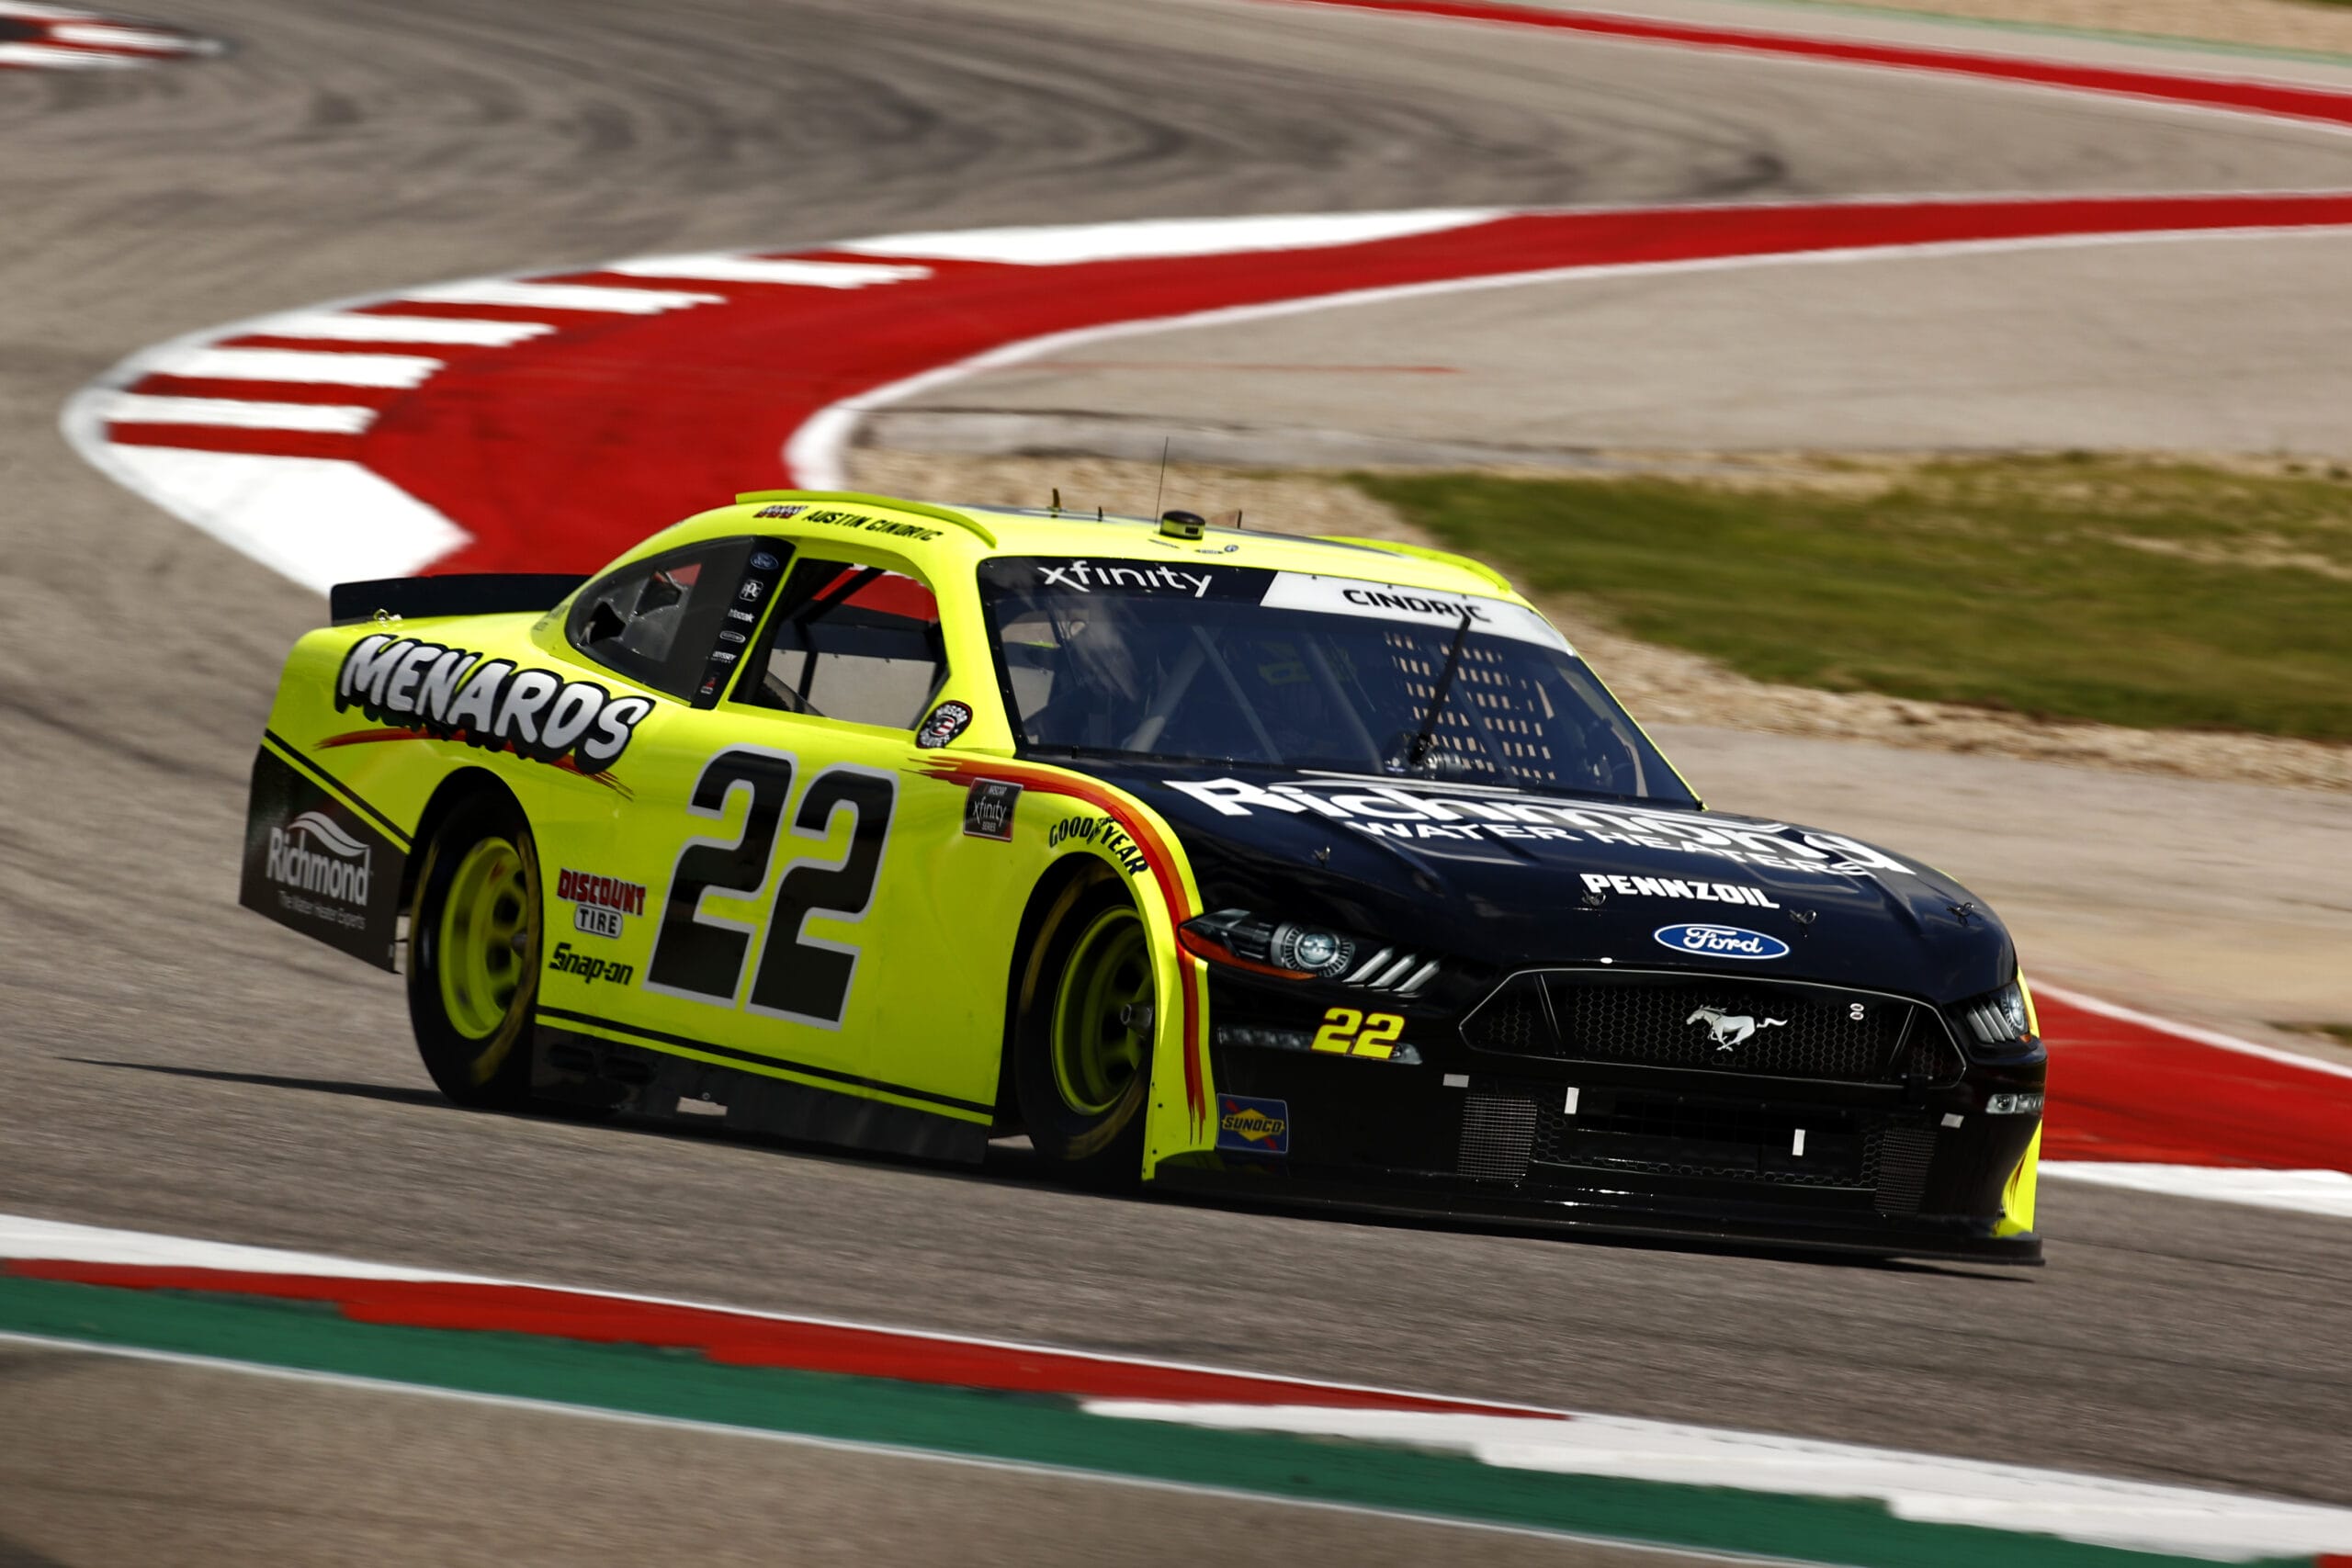 AUSTIN, TEXAS - MAY 21: Austin Cindric, driver of the #22 Menards/Richmond Ford, drives during practice for the NASCAR Xfinity Series Pit Boss 250 at Circuit of The Americas on May 21, 2021 in Austin, Texas.